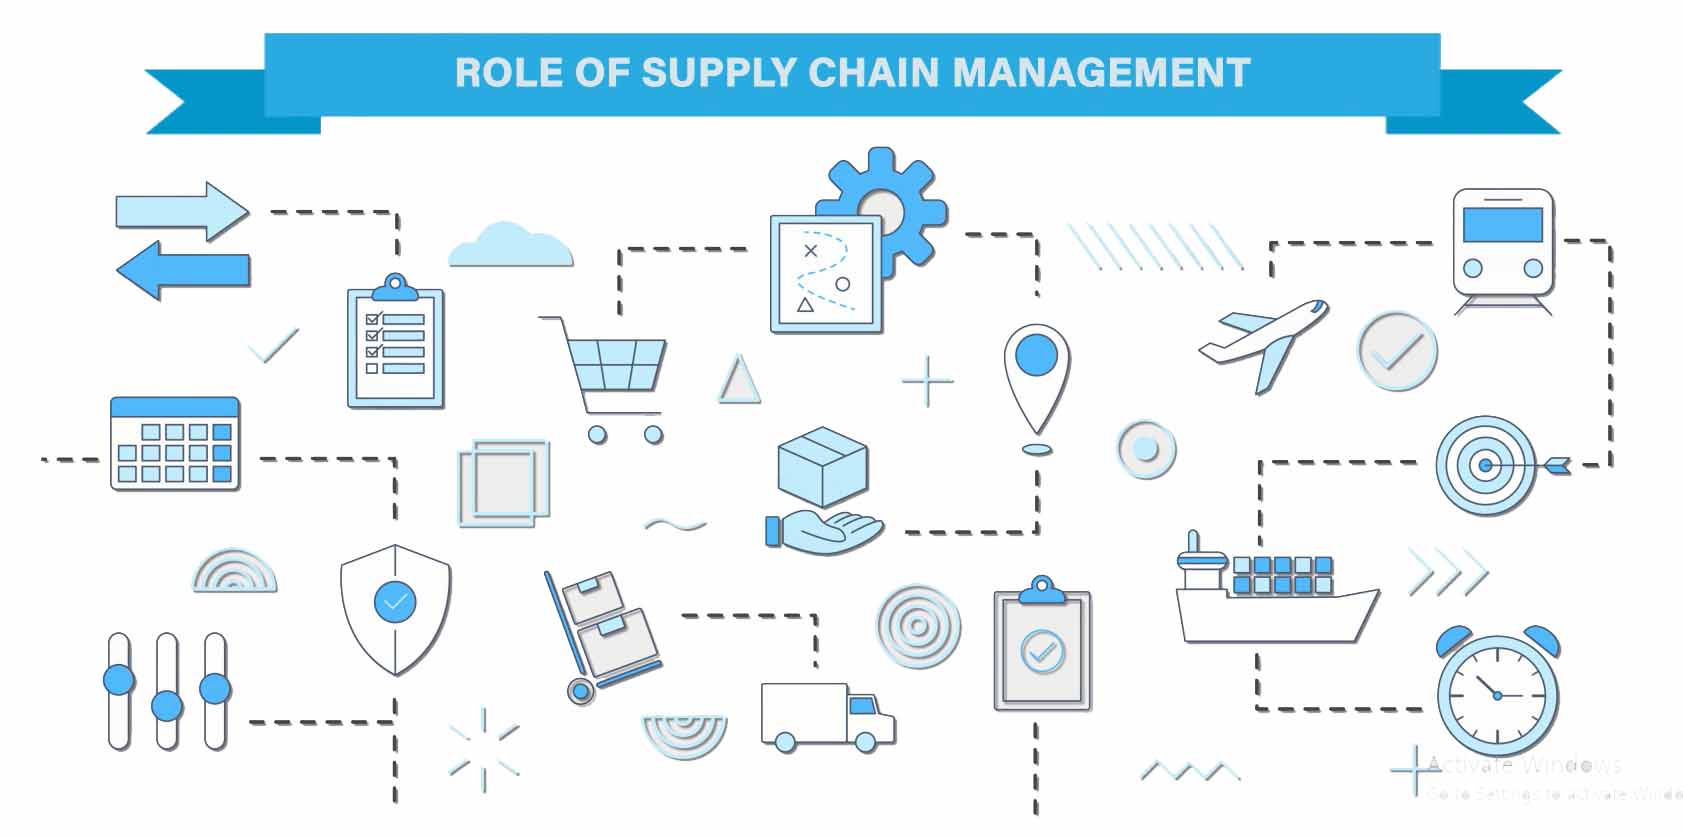 Importance And Role Of Supply Chain Management 2022